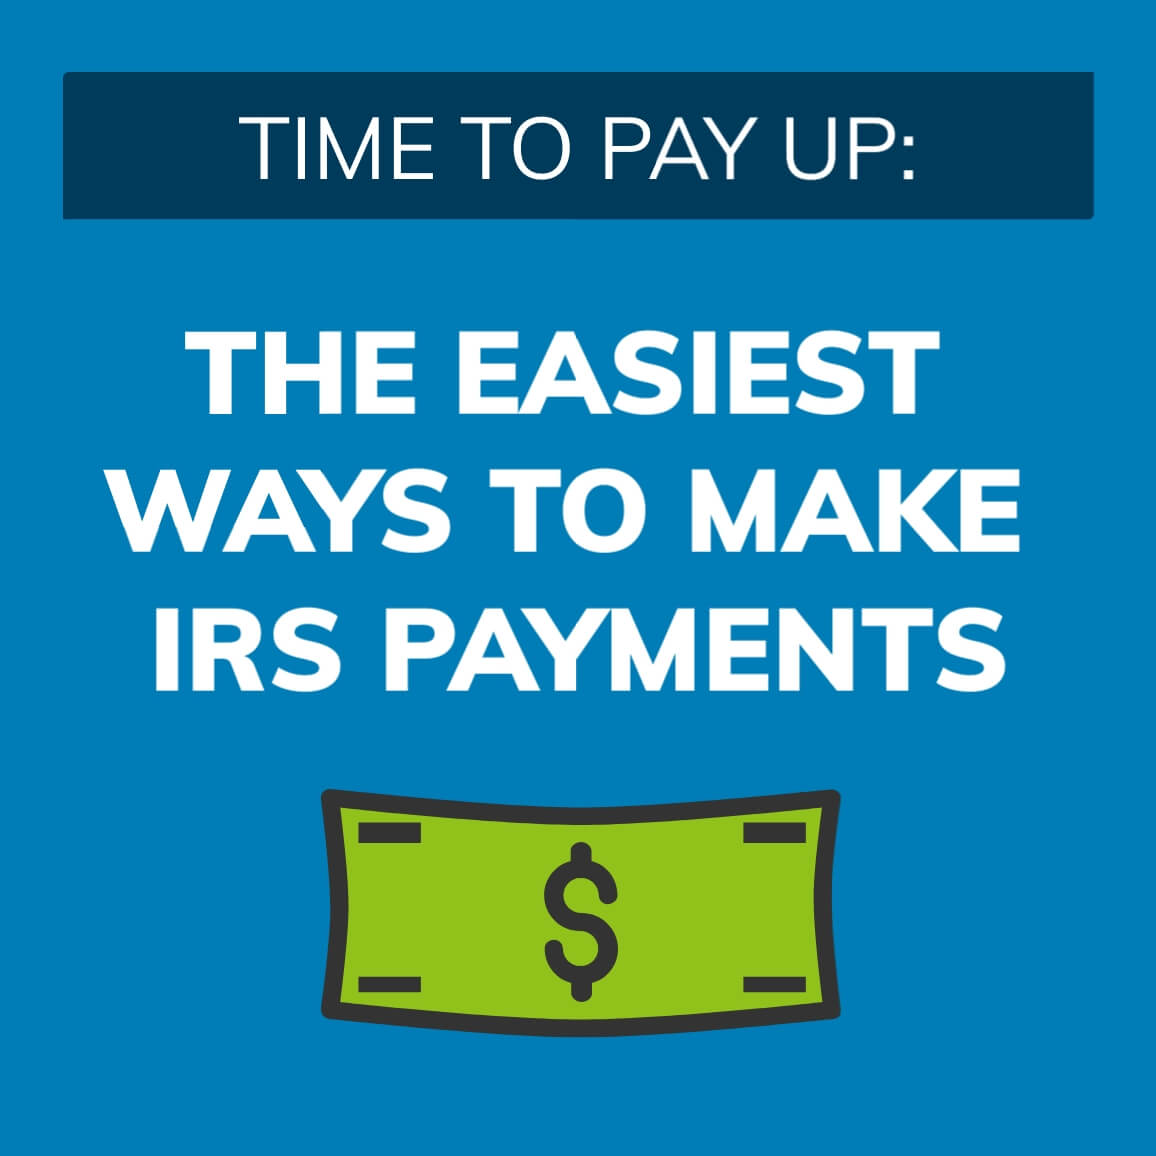 4 Ways to Make IRS Payments pdf download